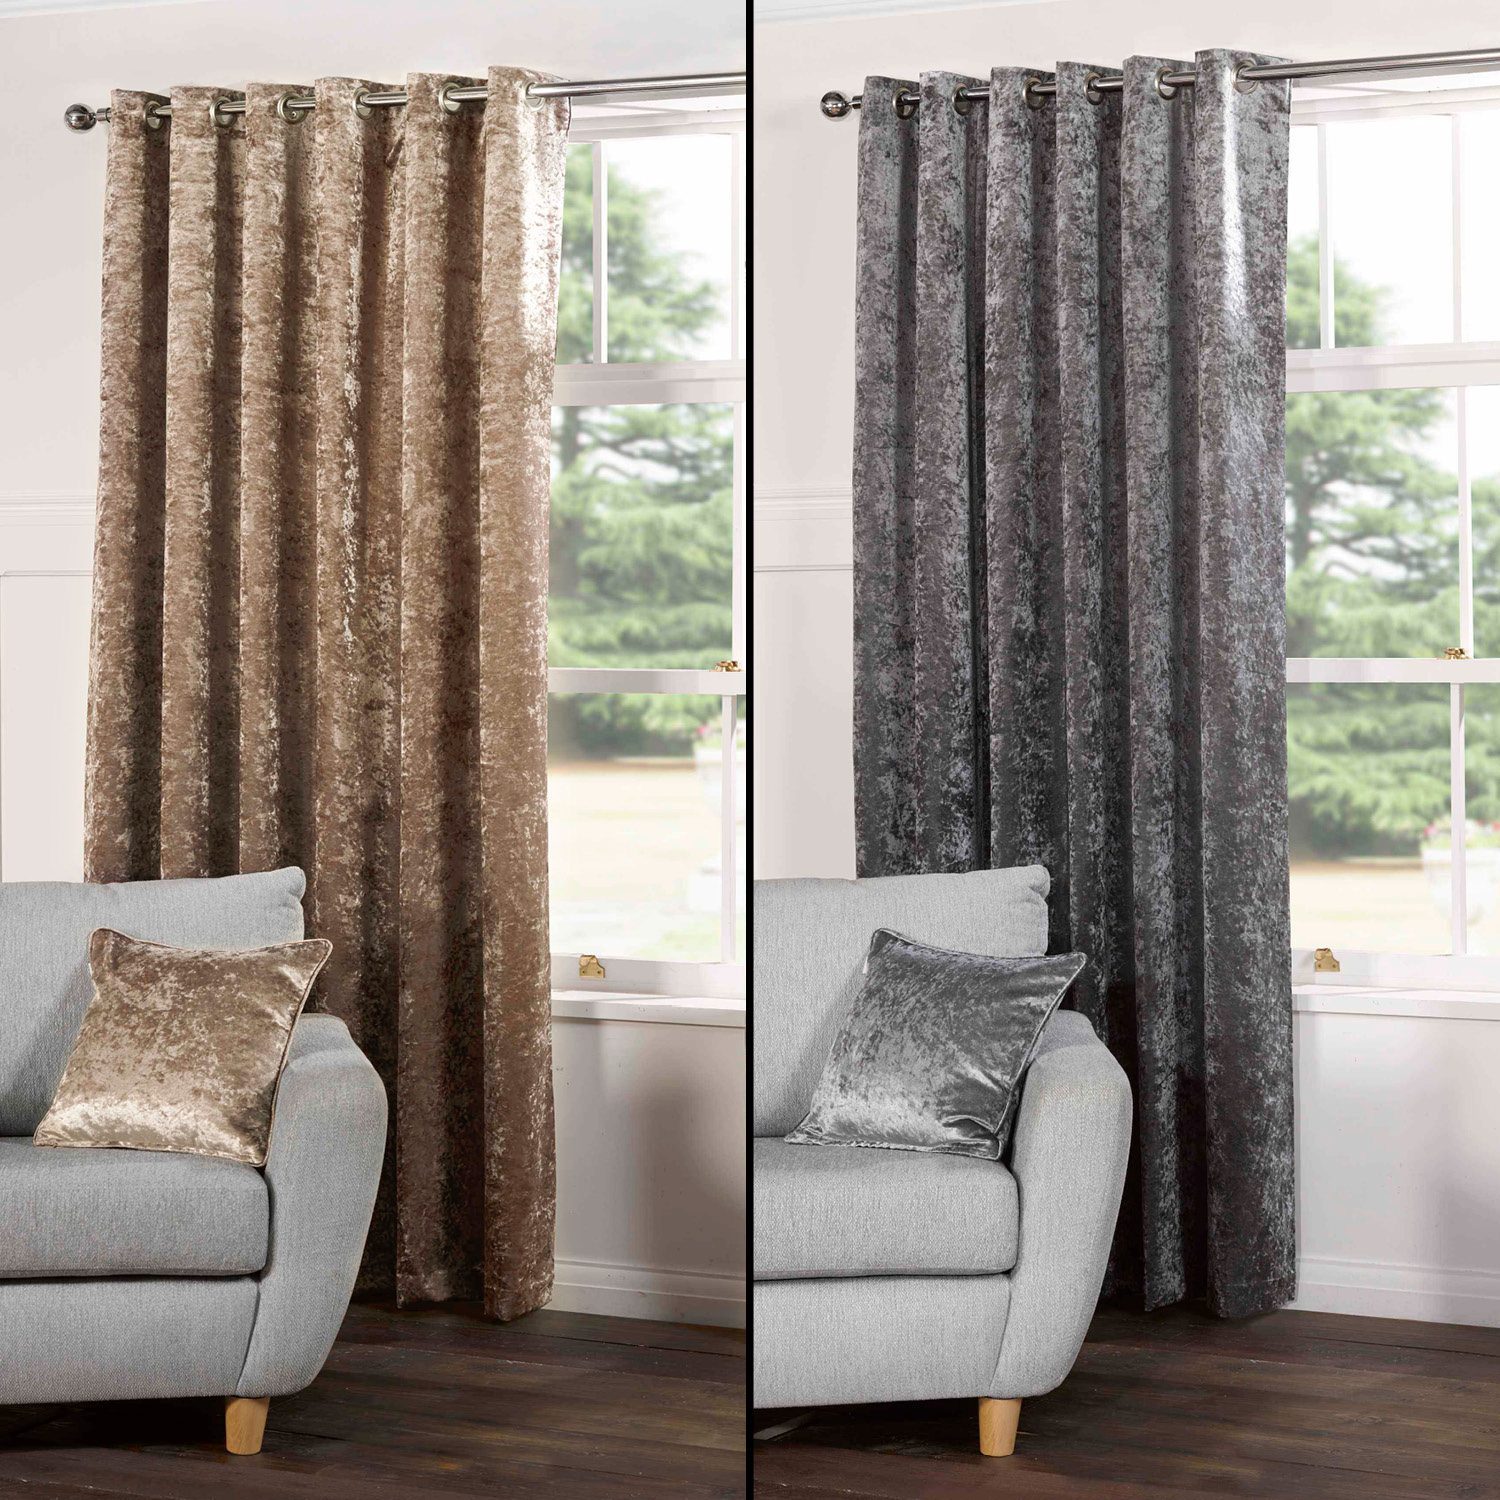 Pair Of Crushed Velvet Fully Lined Eyelet Curtains Silver Grey Champagne Gold Ebay